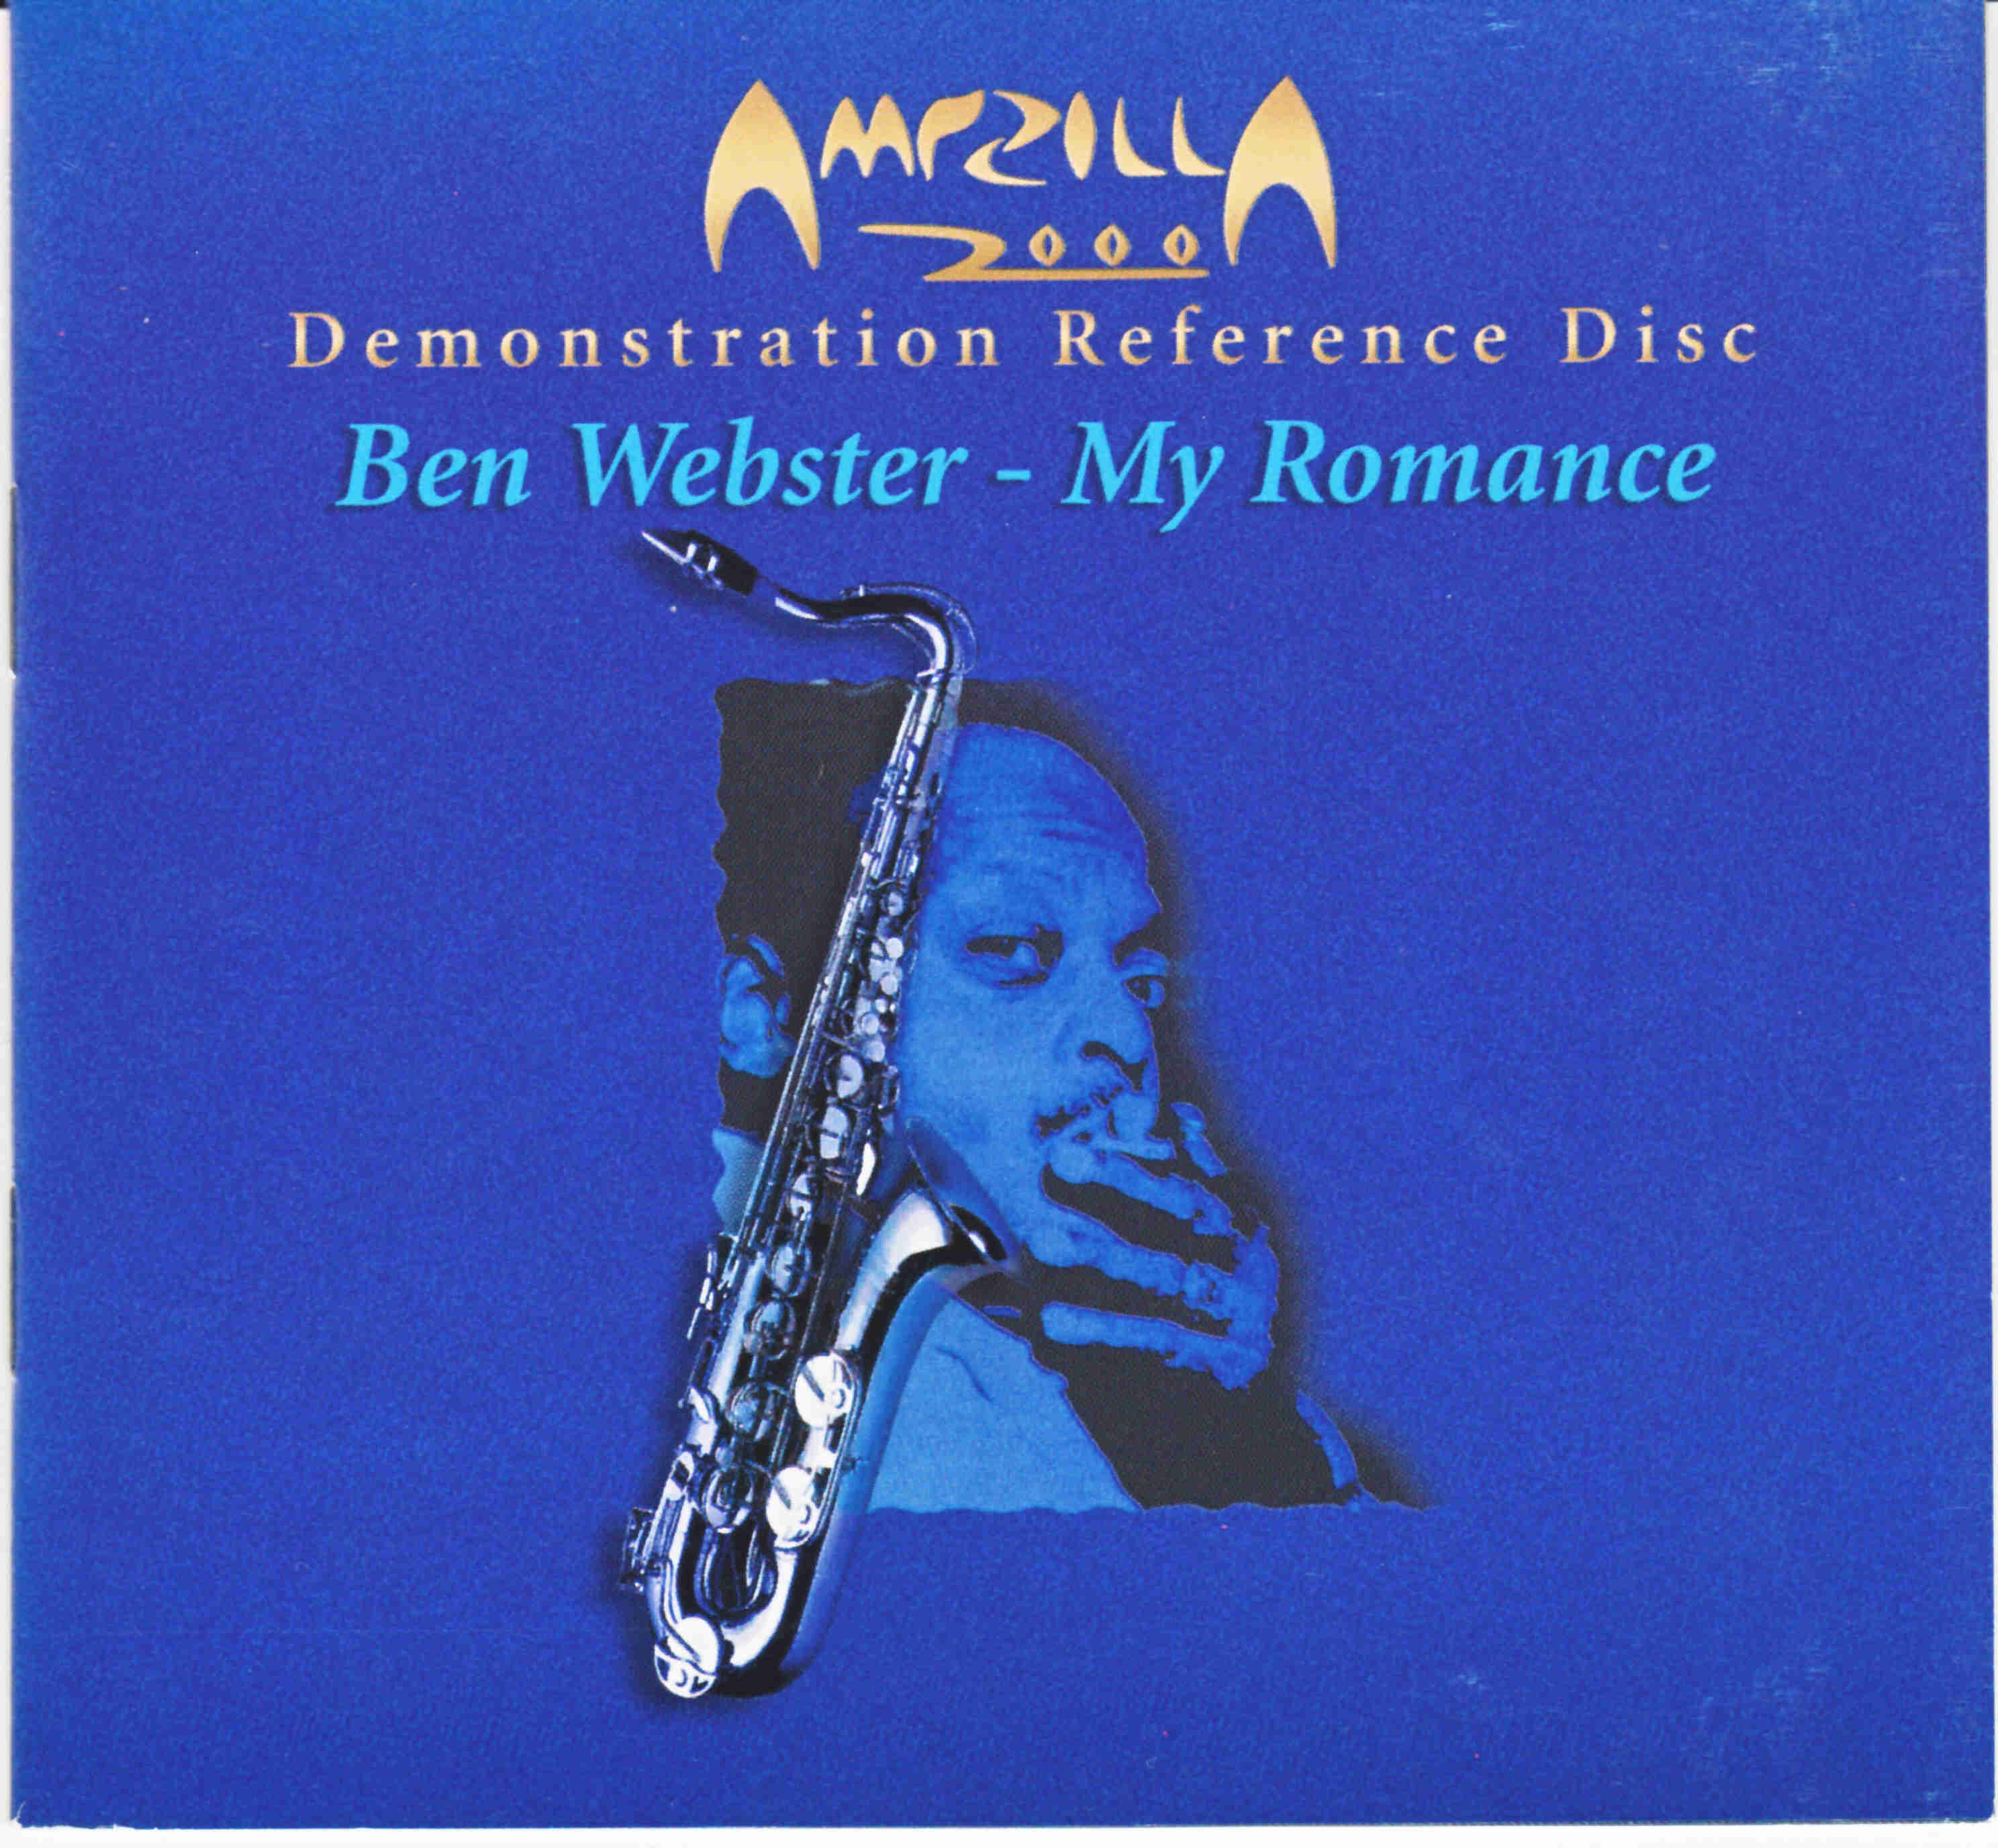 Ben Webster - My Romance - Ampzilla Demonstration Reference Disc (2002) SACD ISO